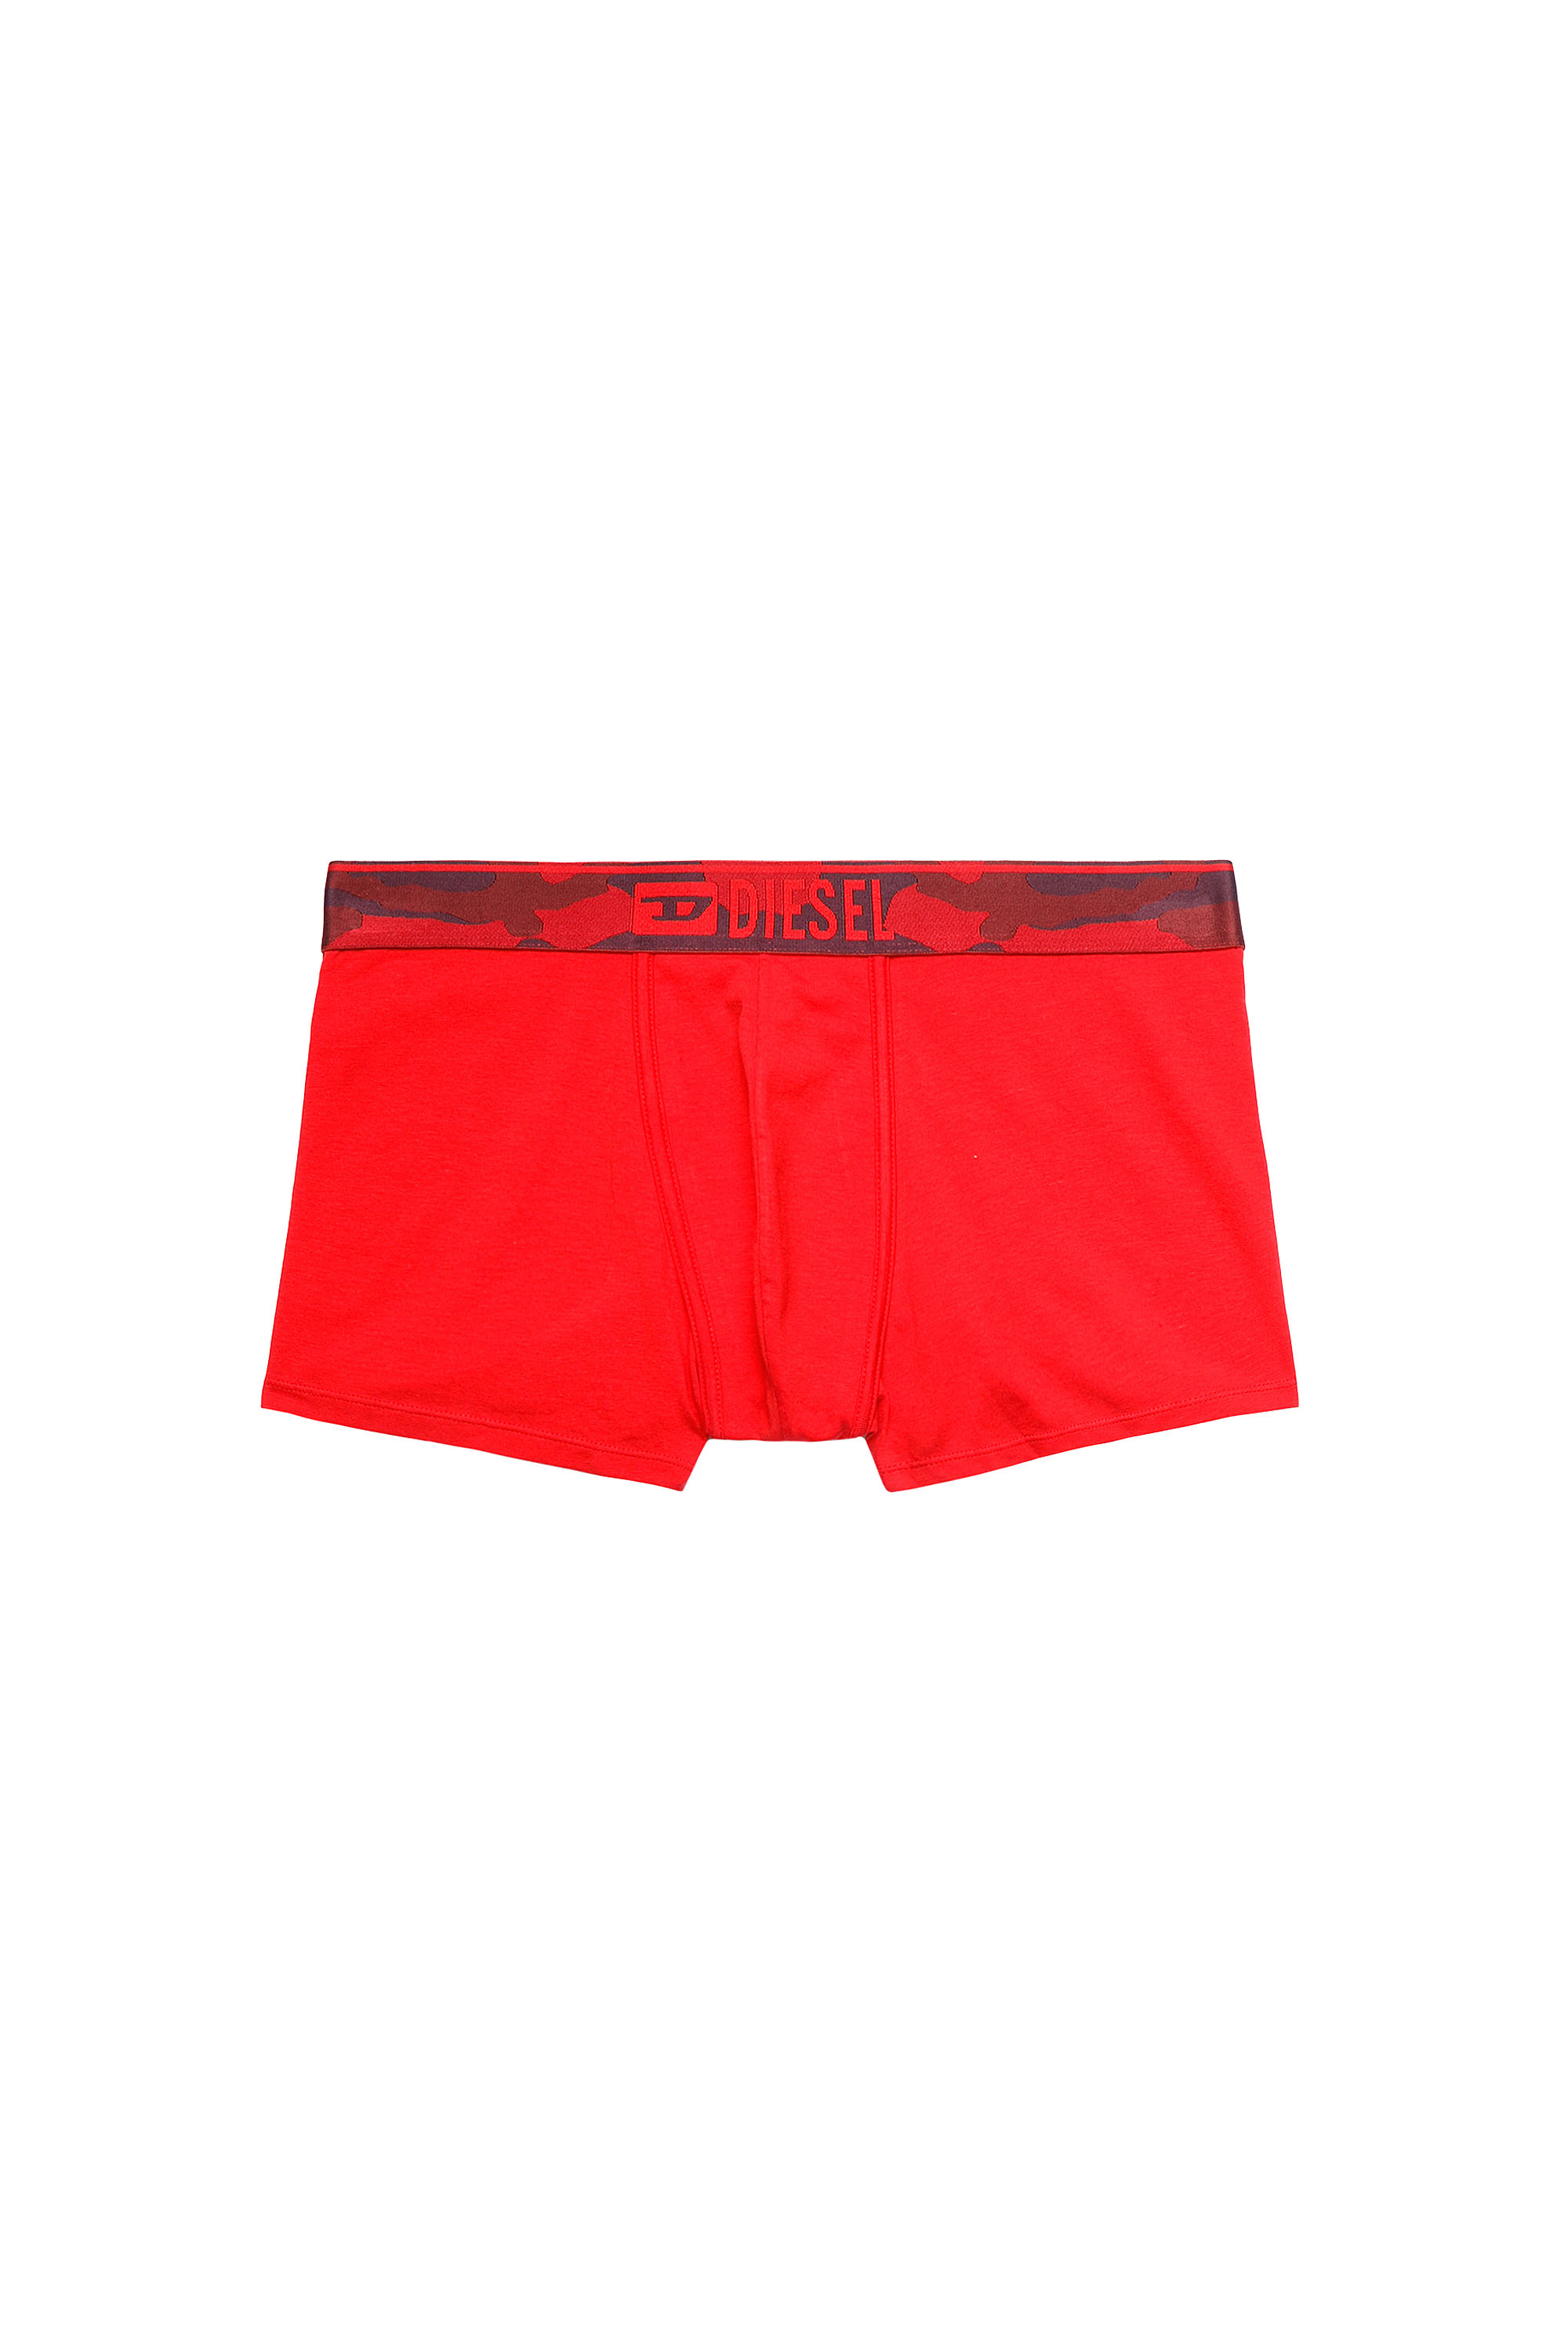 Save 32% Mens Clothing Underwear Boxers briefs DIESEL Briefs With Flipped Logo Waistband in Red for Men 